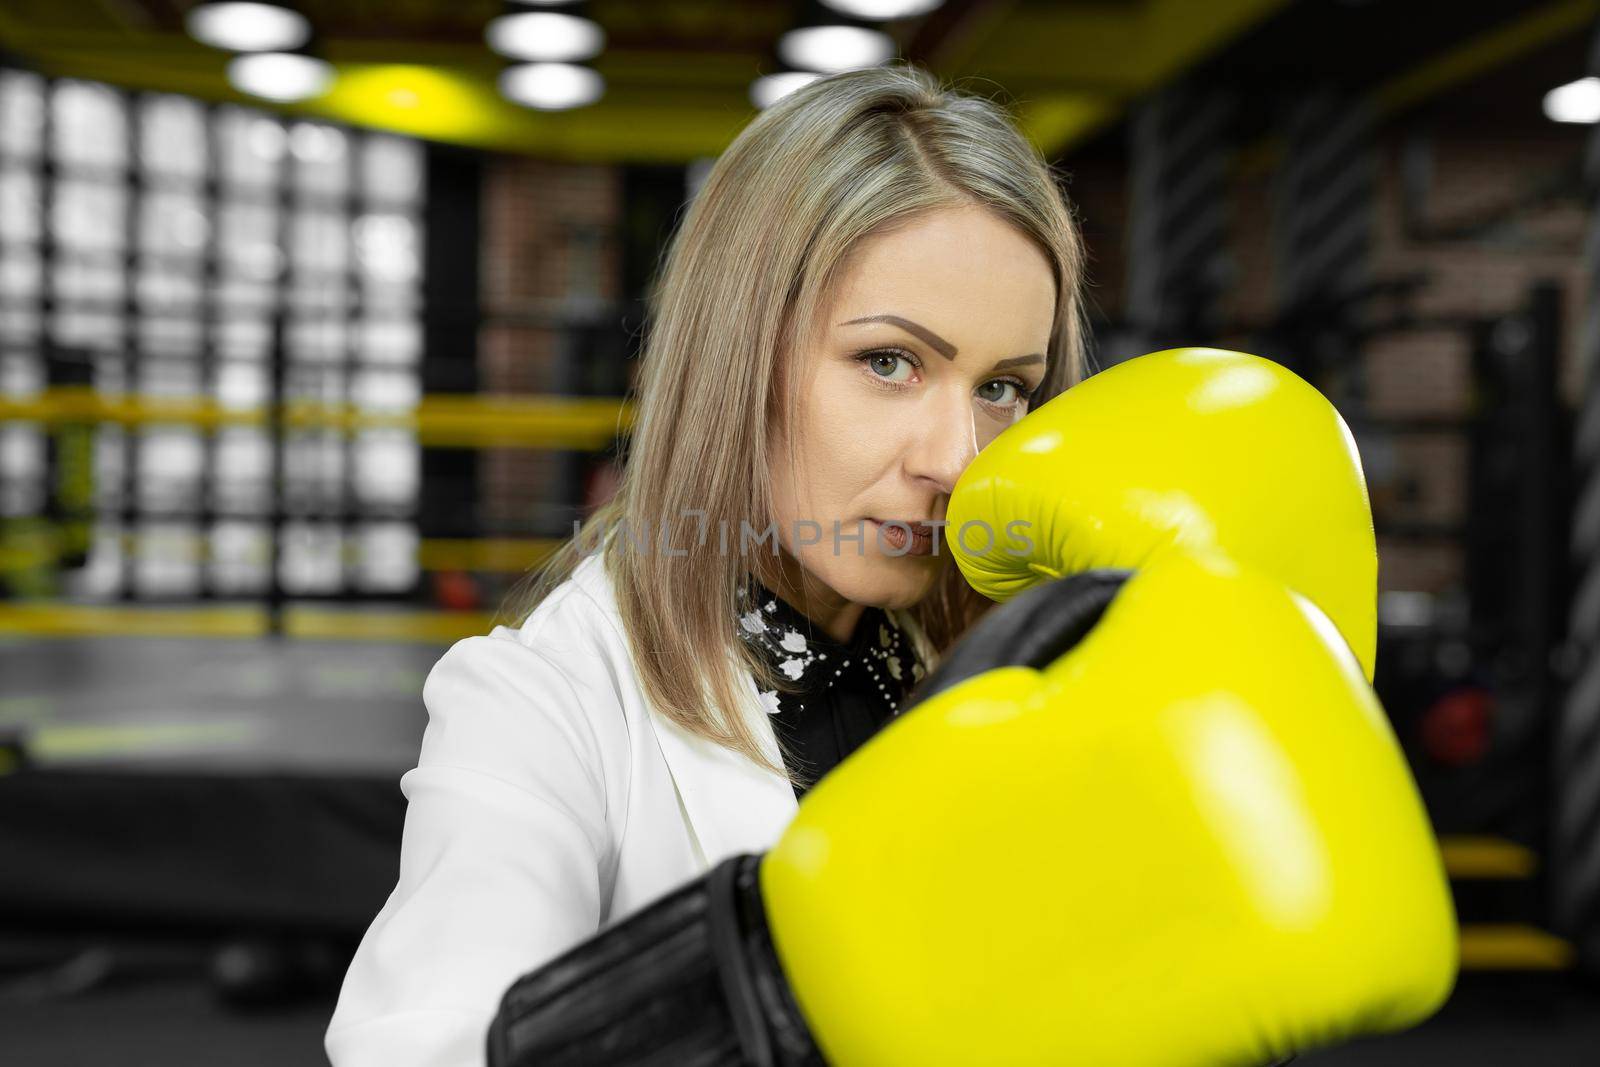 Determined, stylish businesswoman in yellow boxing gloves throws a punch at the camera against the backdrop of a boxing ring by StudioPeace